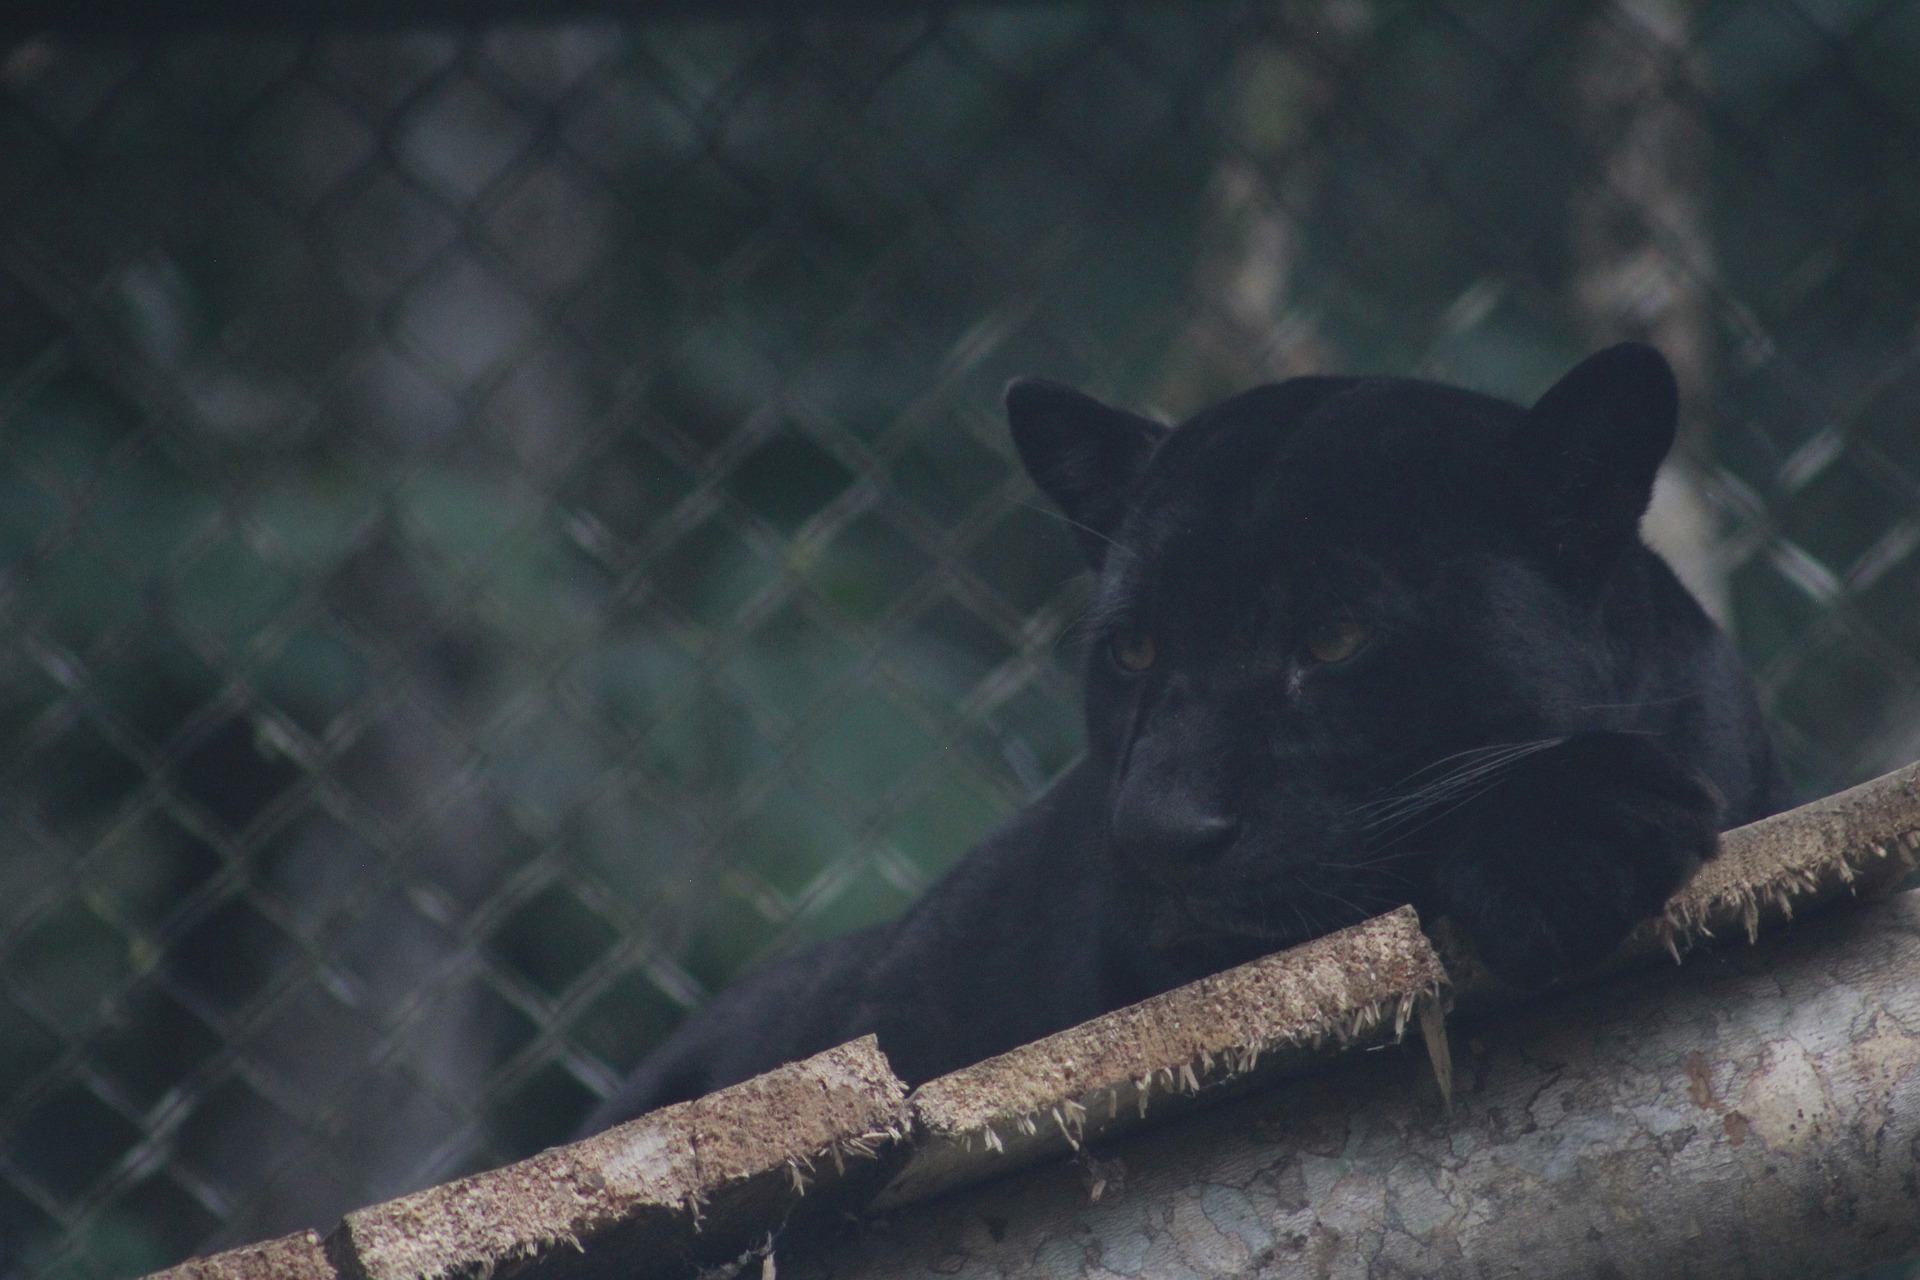 Black Panther Sighted Again, This Time Near Szolnok - VIDEO!